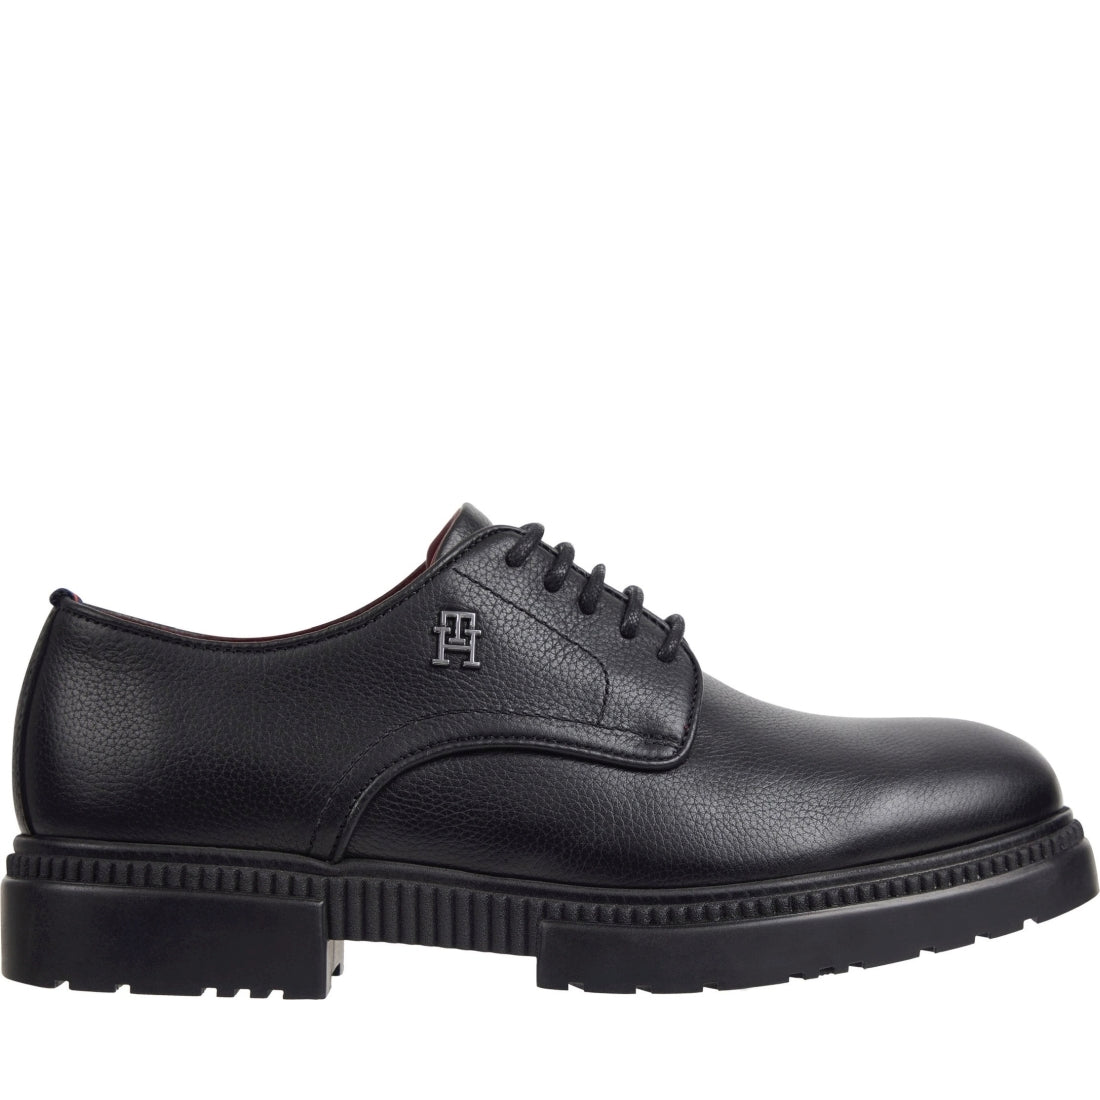 Tommy Hilfiger mens black comfort cleated thermo shoe | Vilbury London